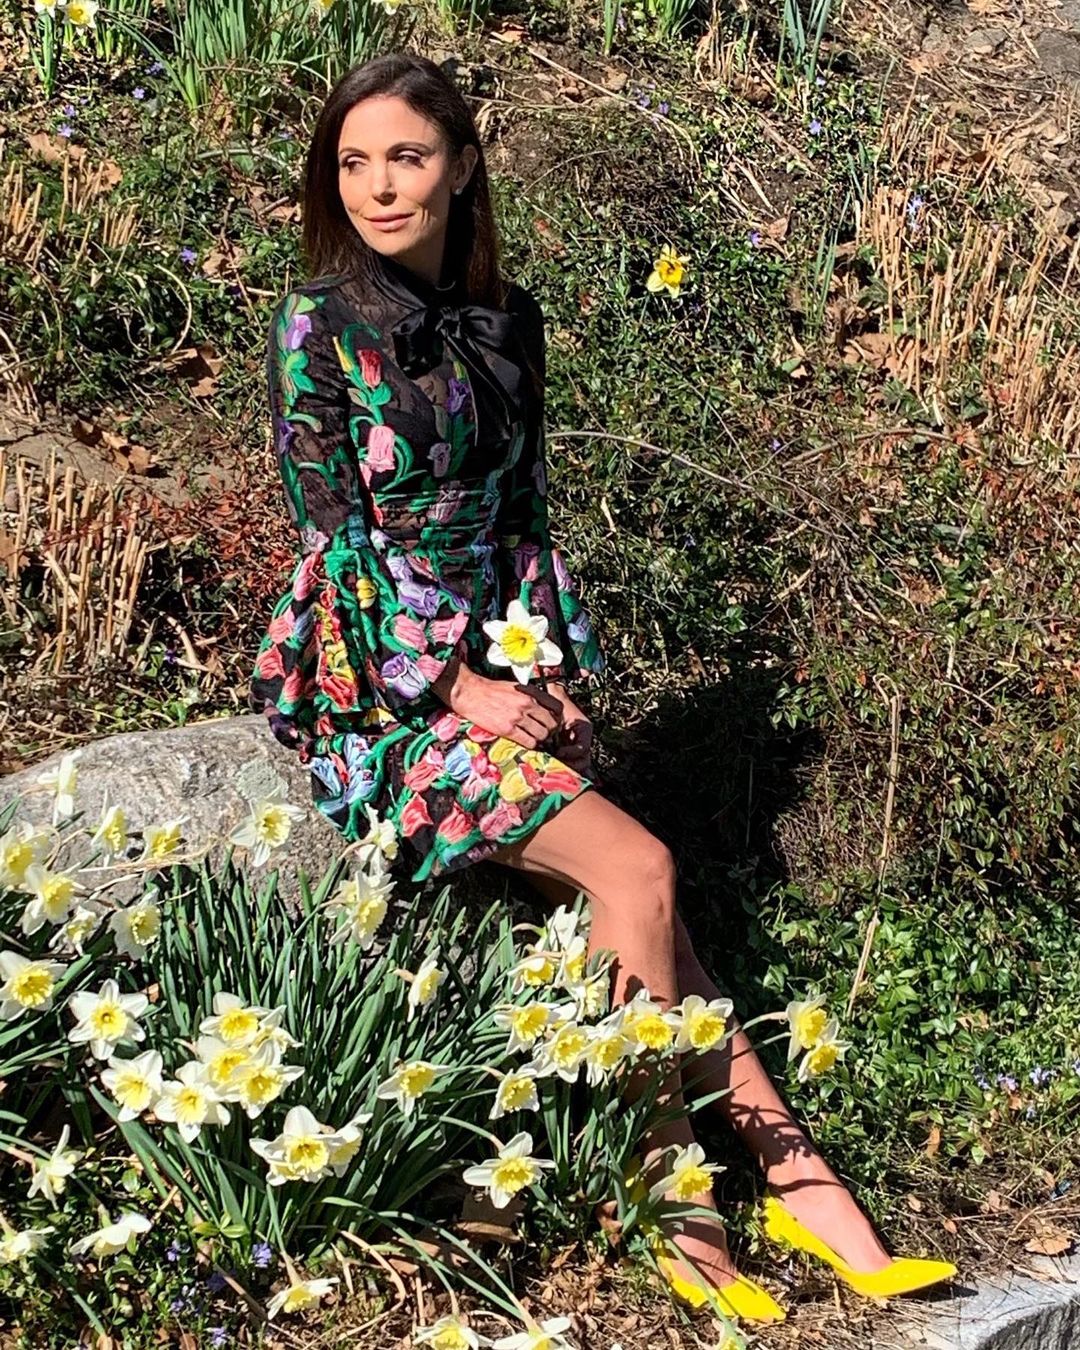 A photo showing Bethenny Frankel posing in a flower garden, filled with sunflowers and she has on a multicolored flowery design dress and yellow color pumps to match.